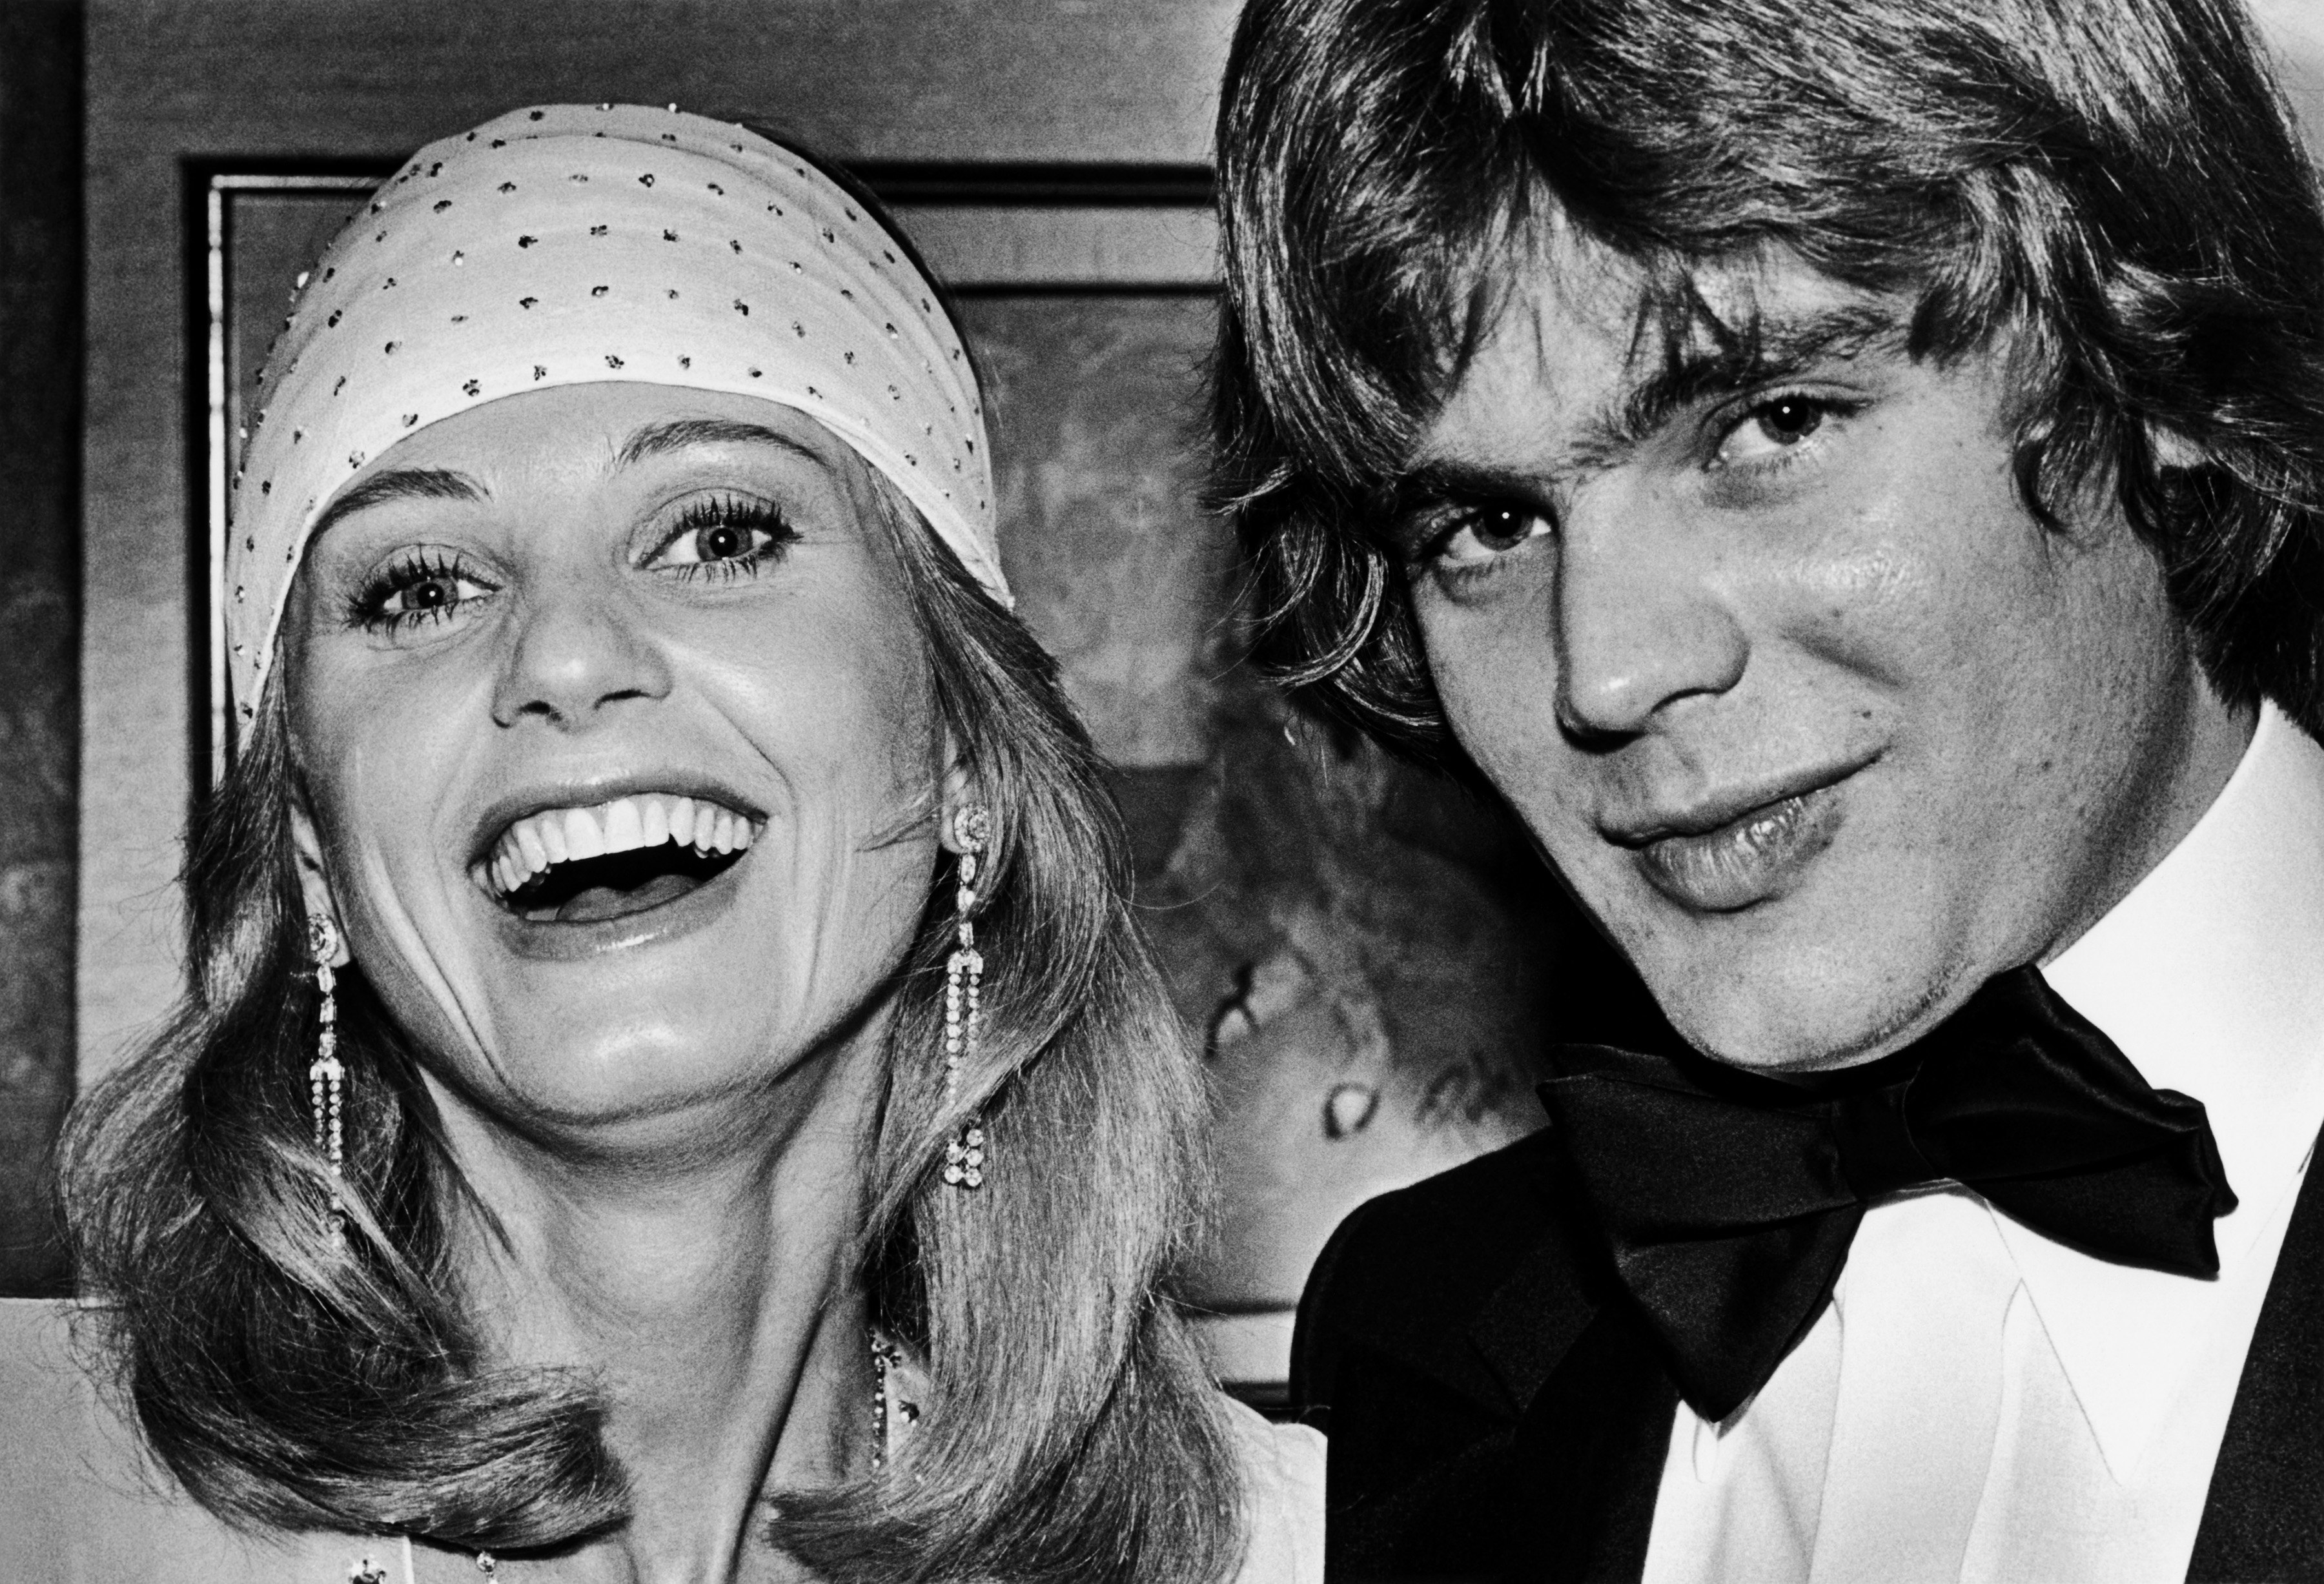 Jill Ireland and Jason McCallum attend a cocktail party in Beverly Hills, California, in 1979 | Source: Getty Images